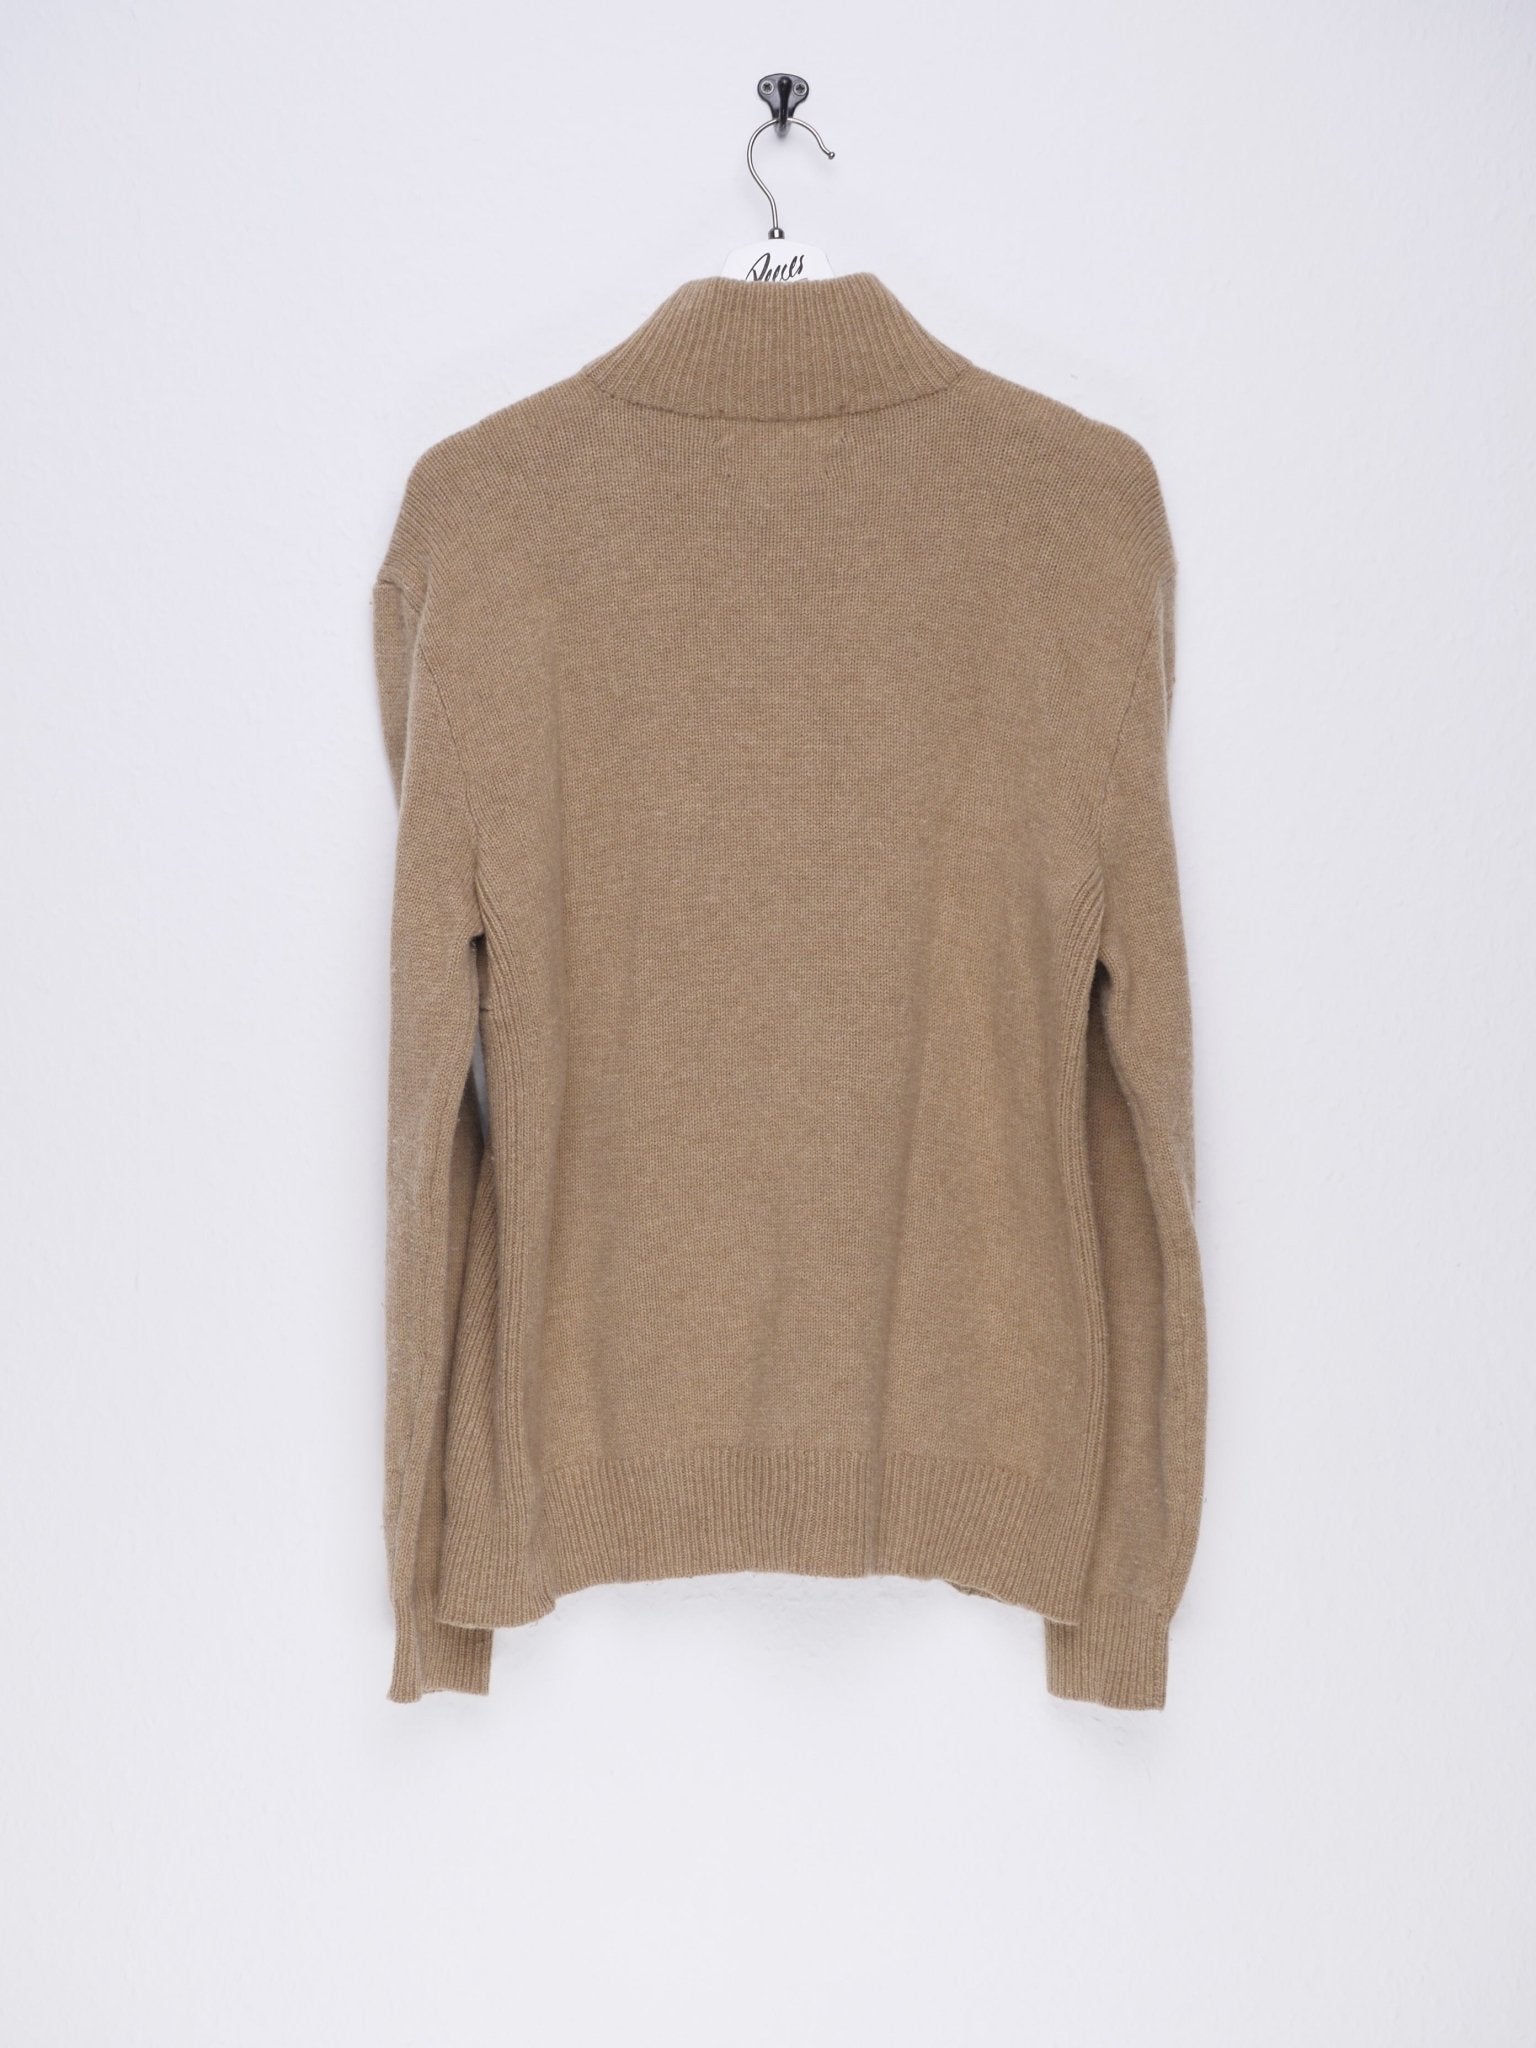 polo embroidered Logo brown Half Zip Sweater - Peeces